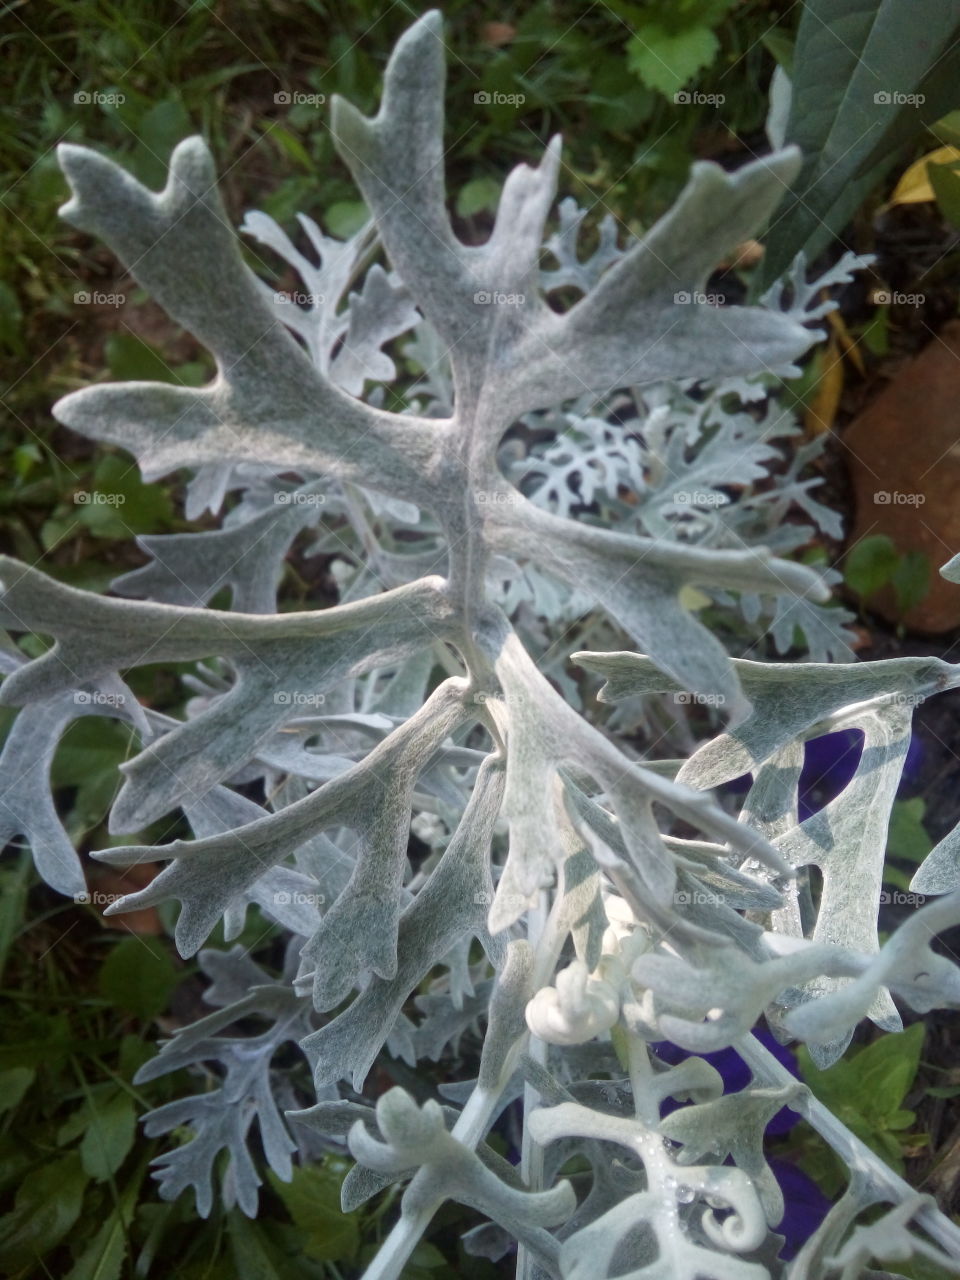 Dusty miller growing happily in it's garden spot. we can learn alot from plants and flowers.